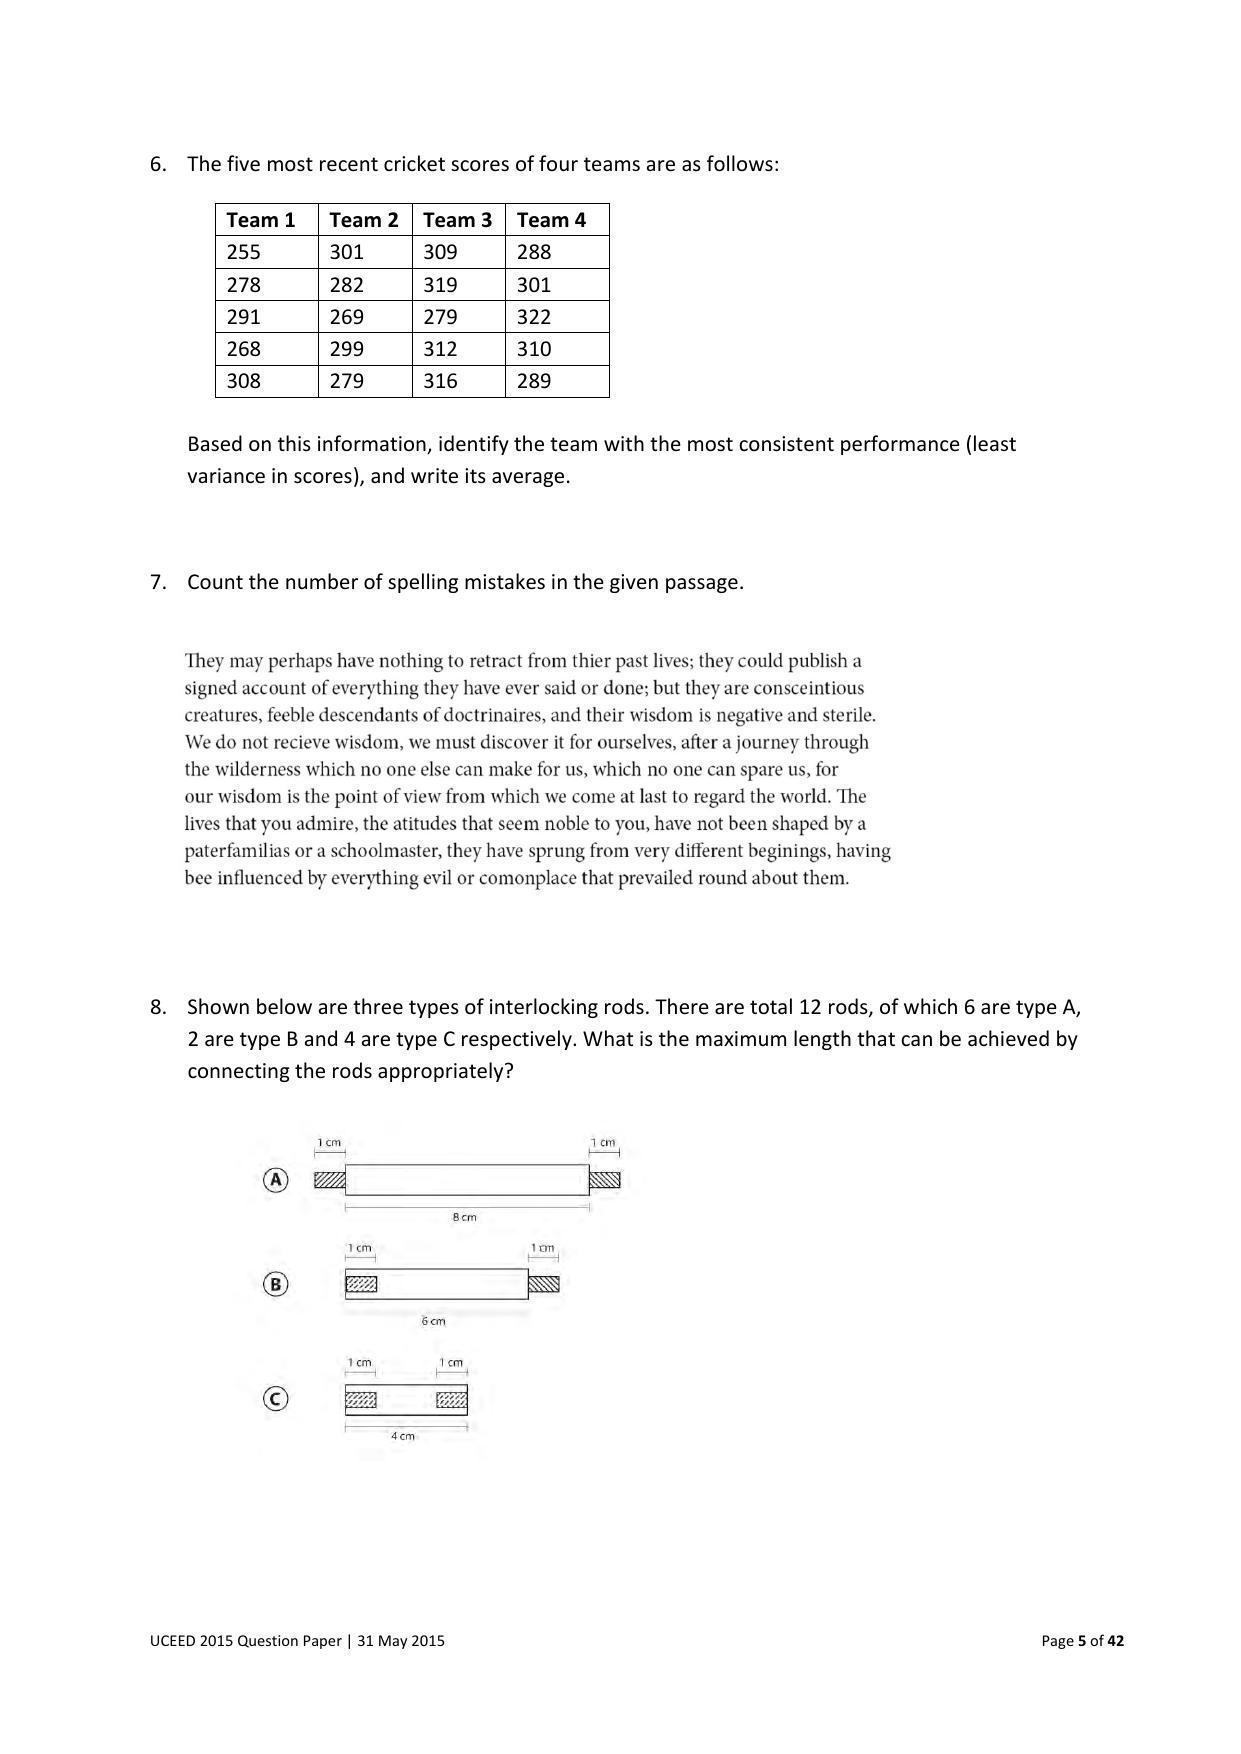 UCEED 2015 Question Paper - Page 5